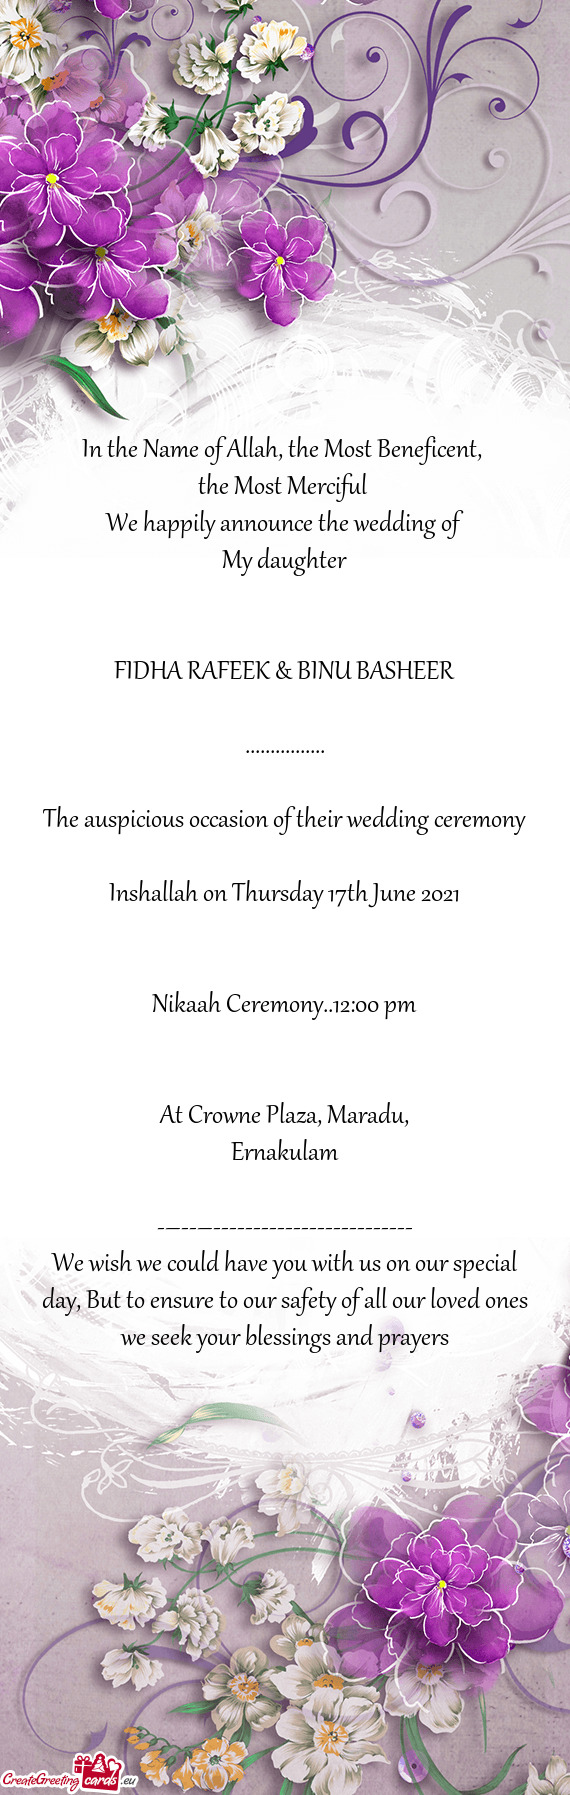 The auspicious occasion of their wedding ceremony
 
 Inshallah on Thursday 17th June 2021
 
 
 N